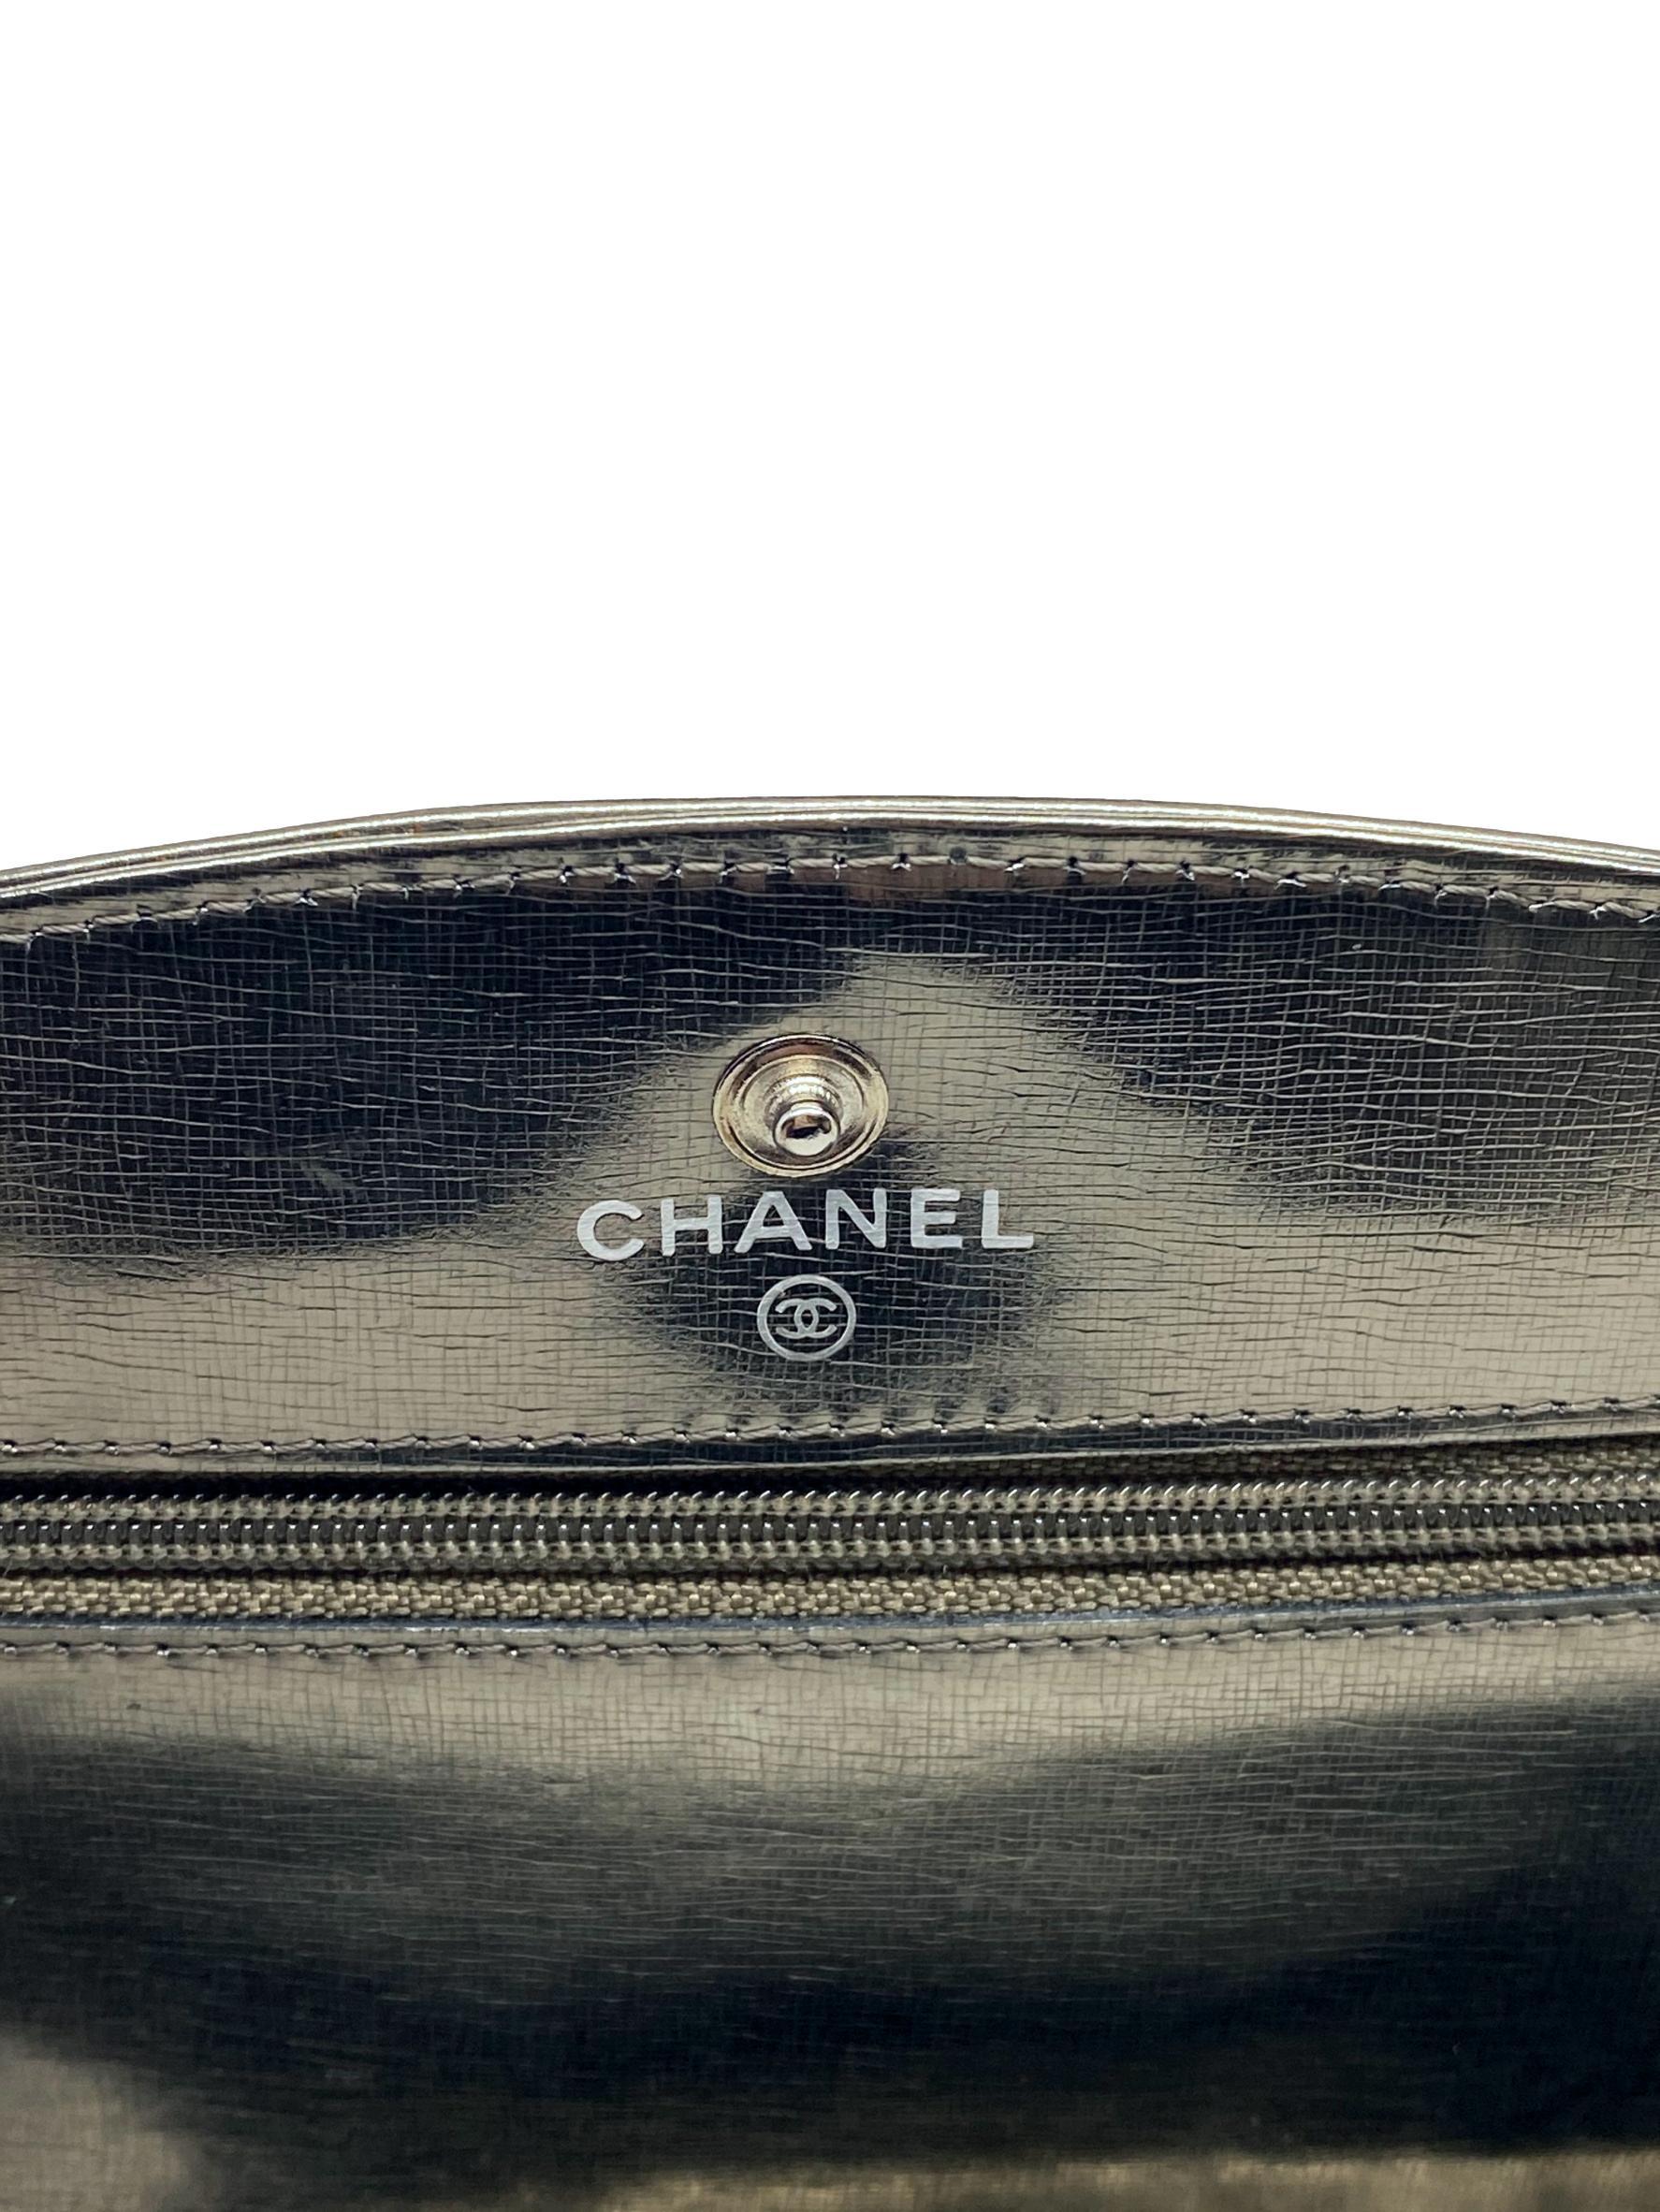 Chanel Timeless Metallic Leather Wallet on Chain Shoulder Clutch Bag, 2008. 8